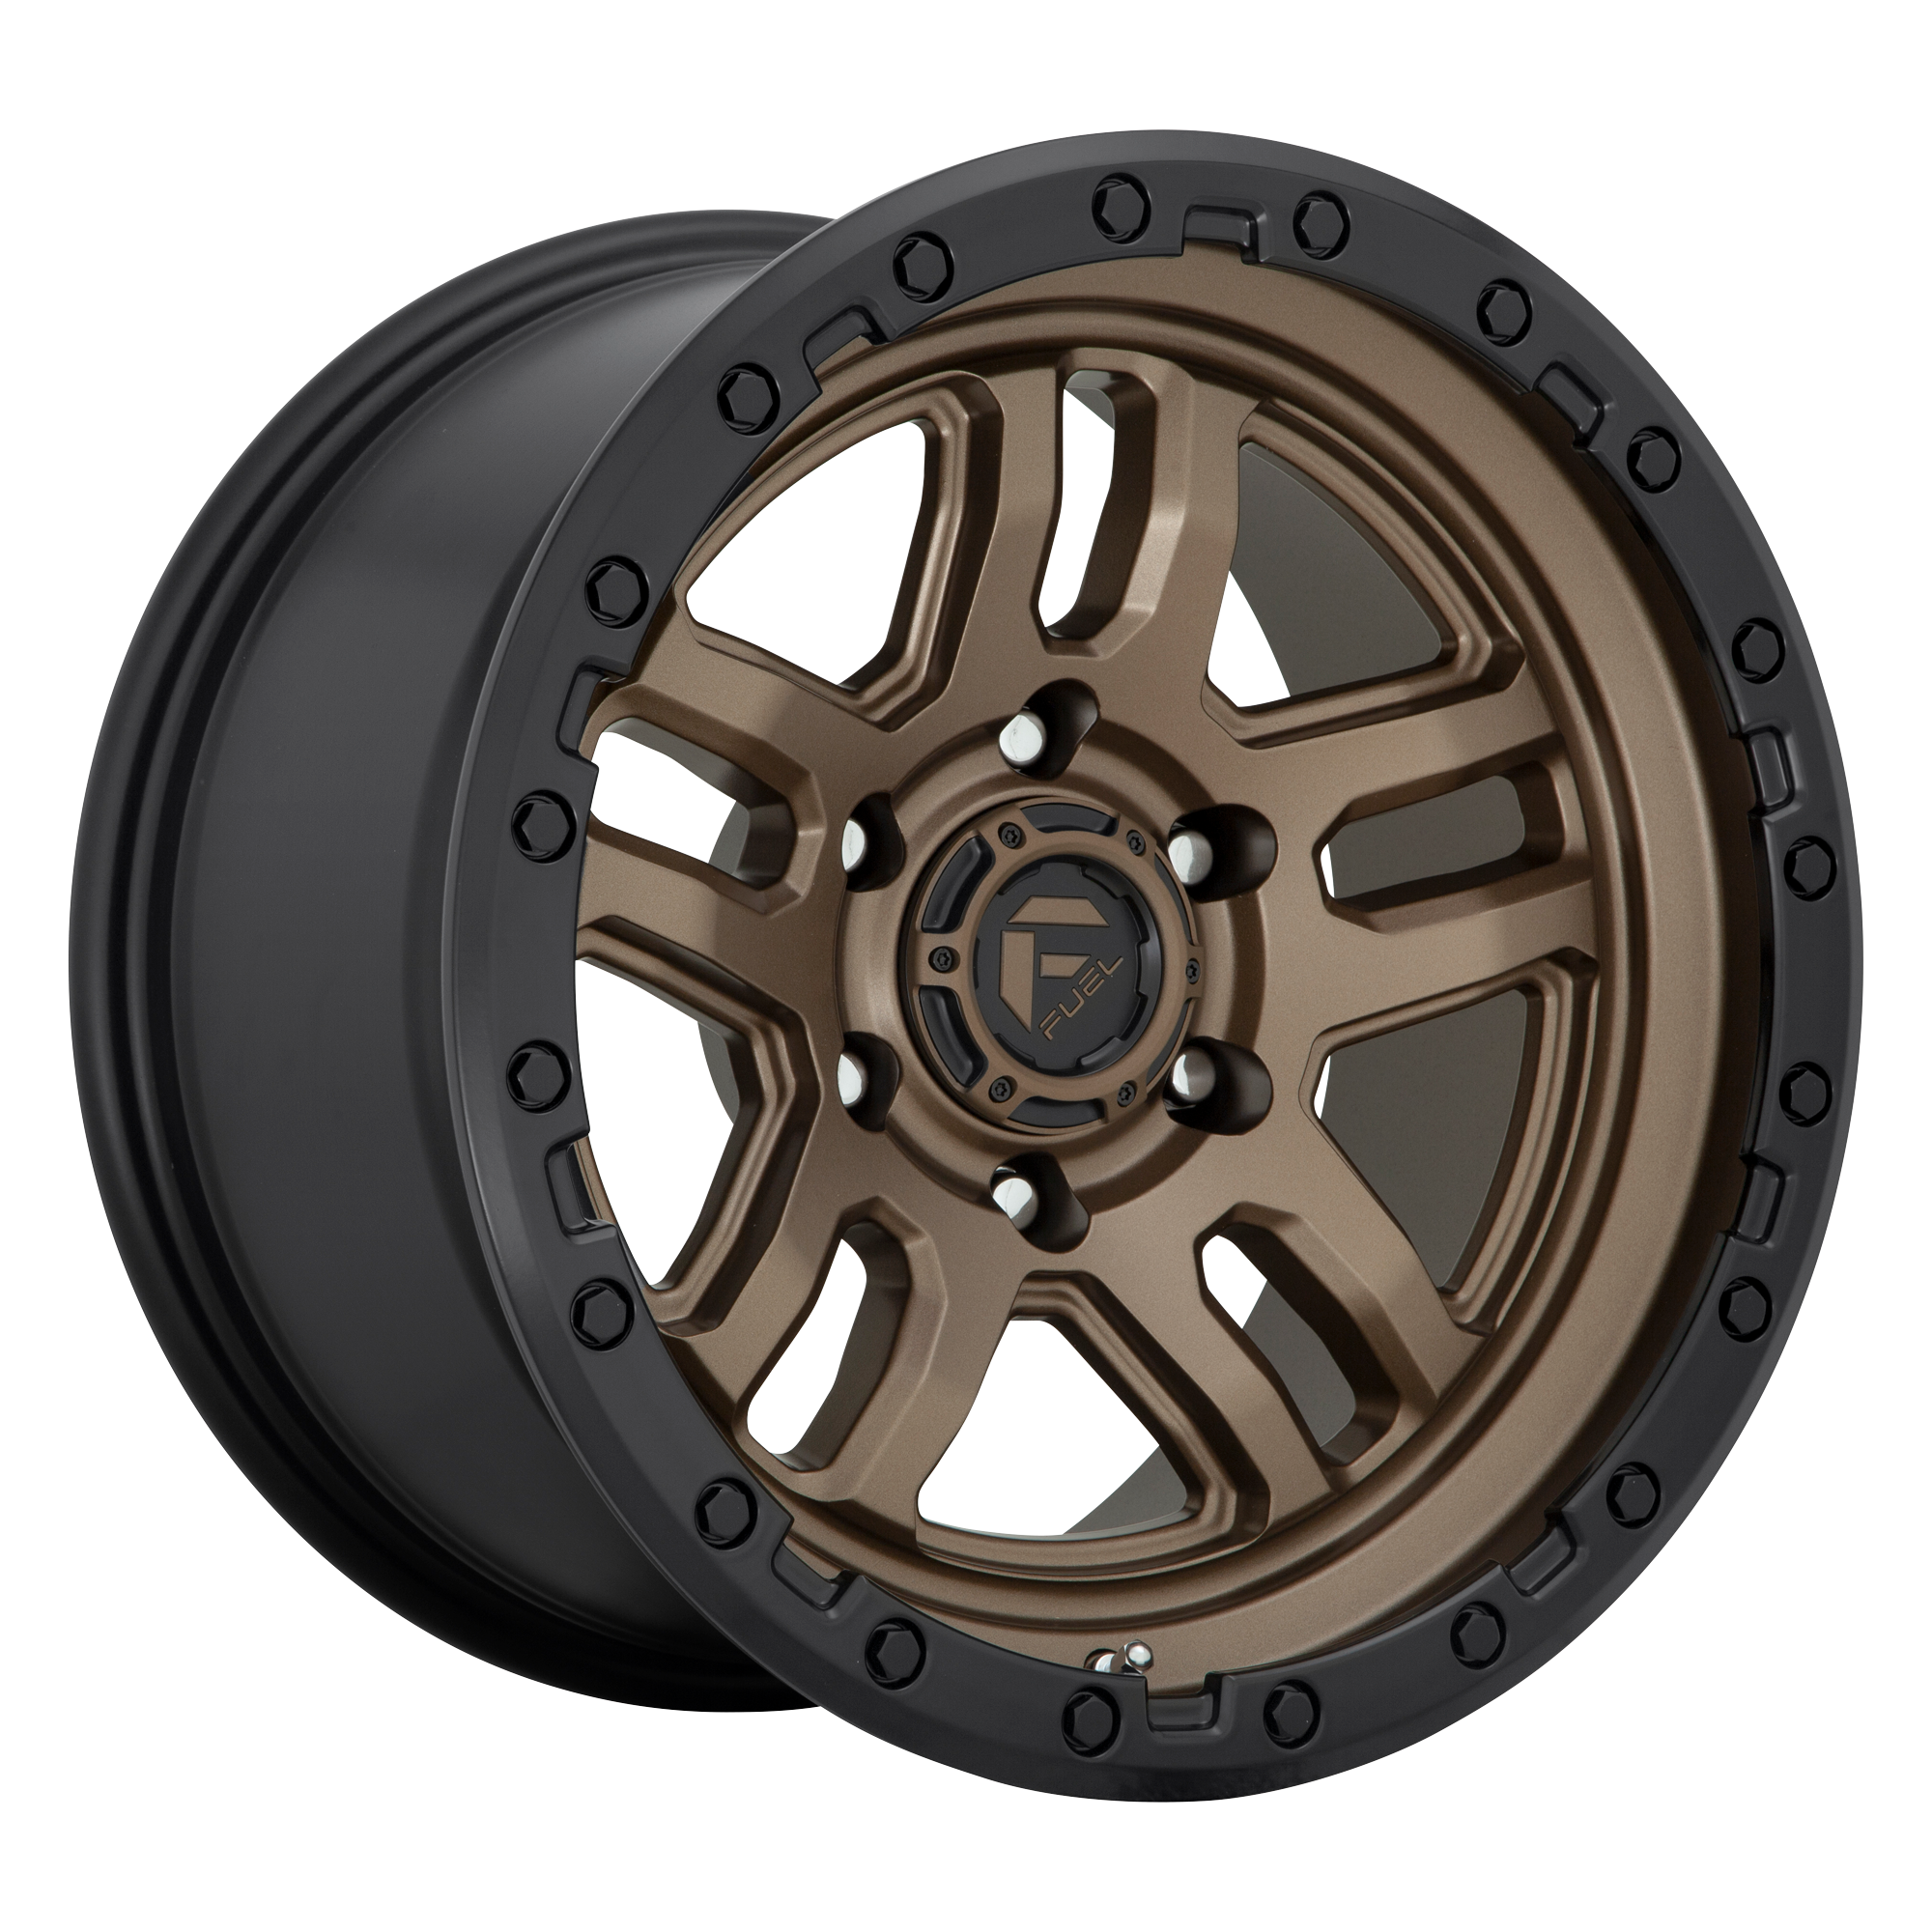 AMMO 20x10 6x135.00 MATTE BRONZE BLACK BEAD RING (-18 mm) - Tires and Engine Performance